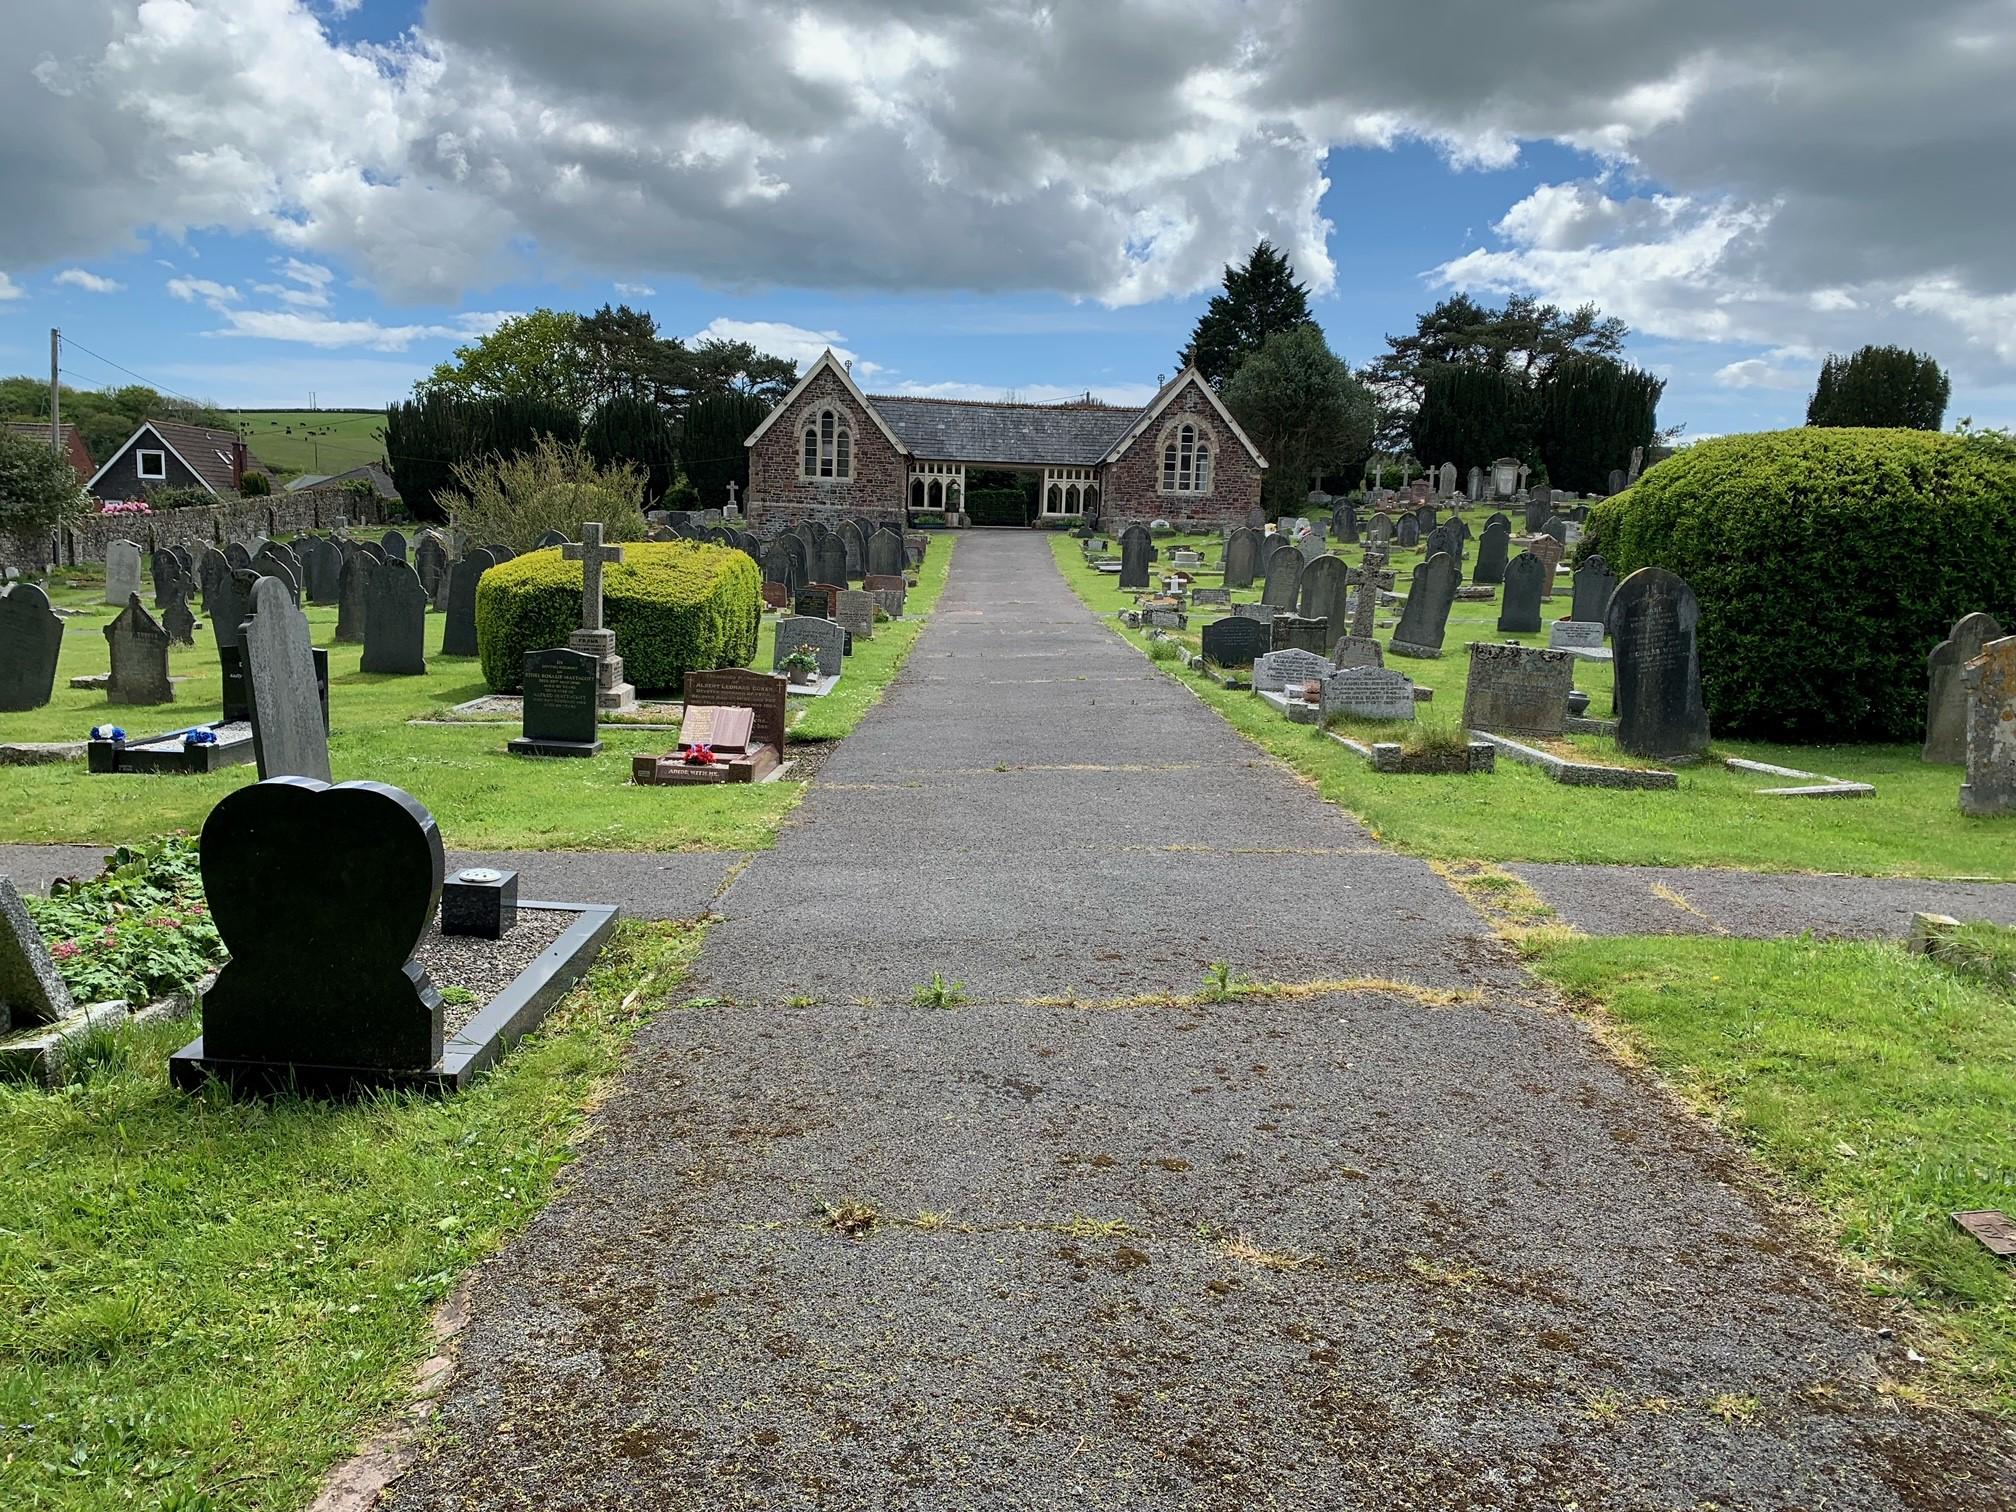 A view of the old part of the Cemetery looking towards the chapel